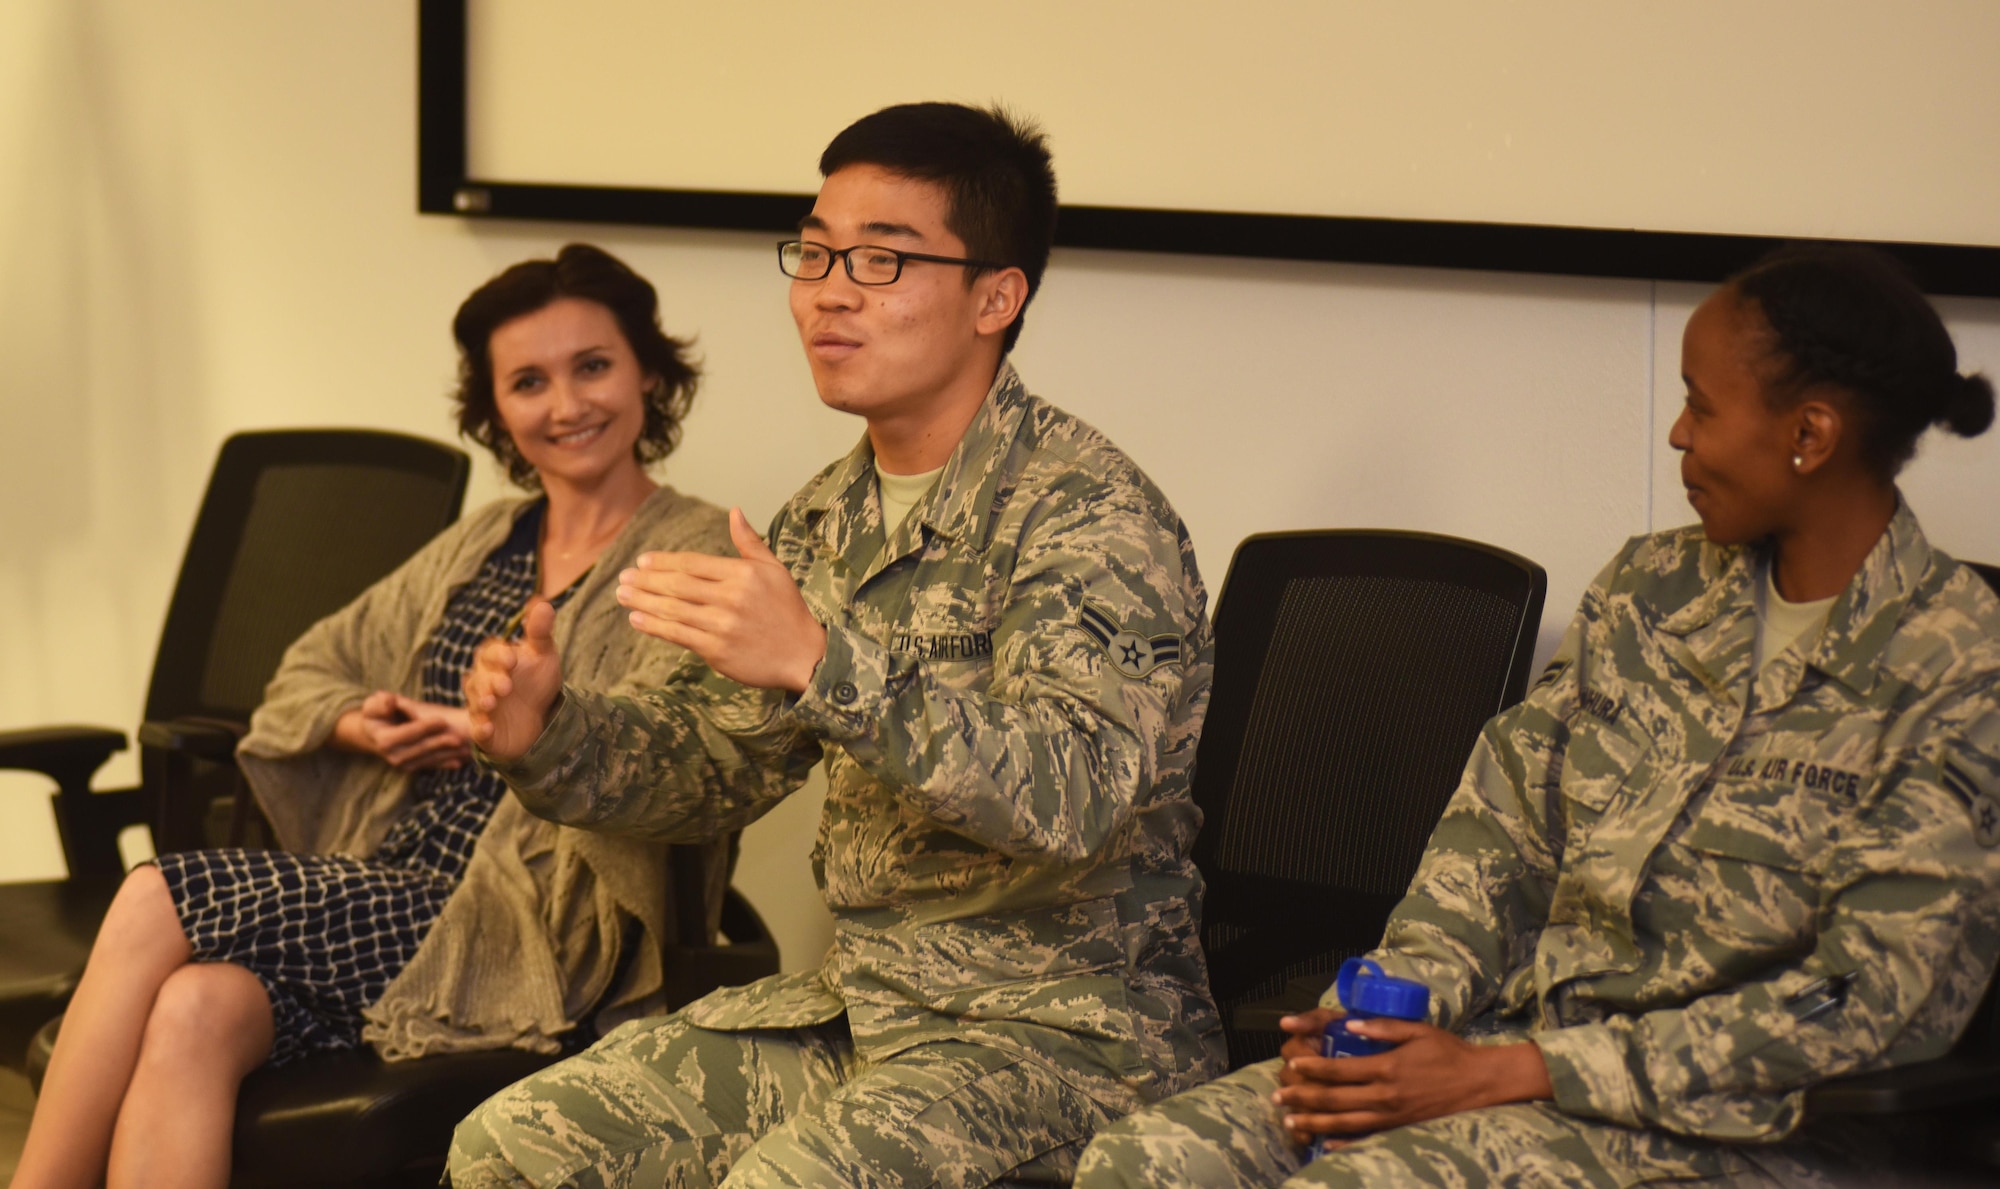 Airman 1st Class Woo Jin Eum, United States Air Force Special Operations School Korean language and culture advisor, speaks during a course on Hurlburt Field, Fla., March 31, 2016. Eum said he enjoys his current job so much, he’s considering turning down his opportunity to attend the Air Force Academy. (U.S. Air Force photo/Staff Sgt. Melanie Holochwost)